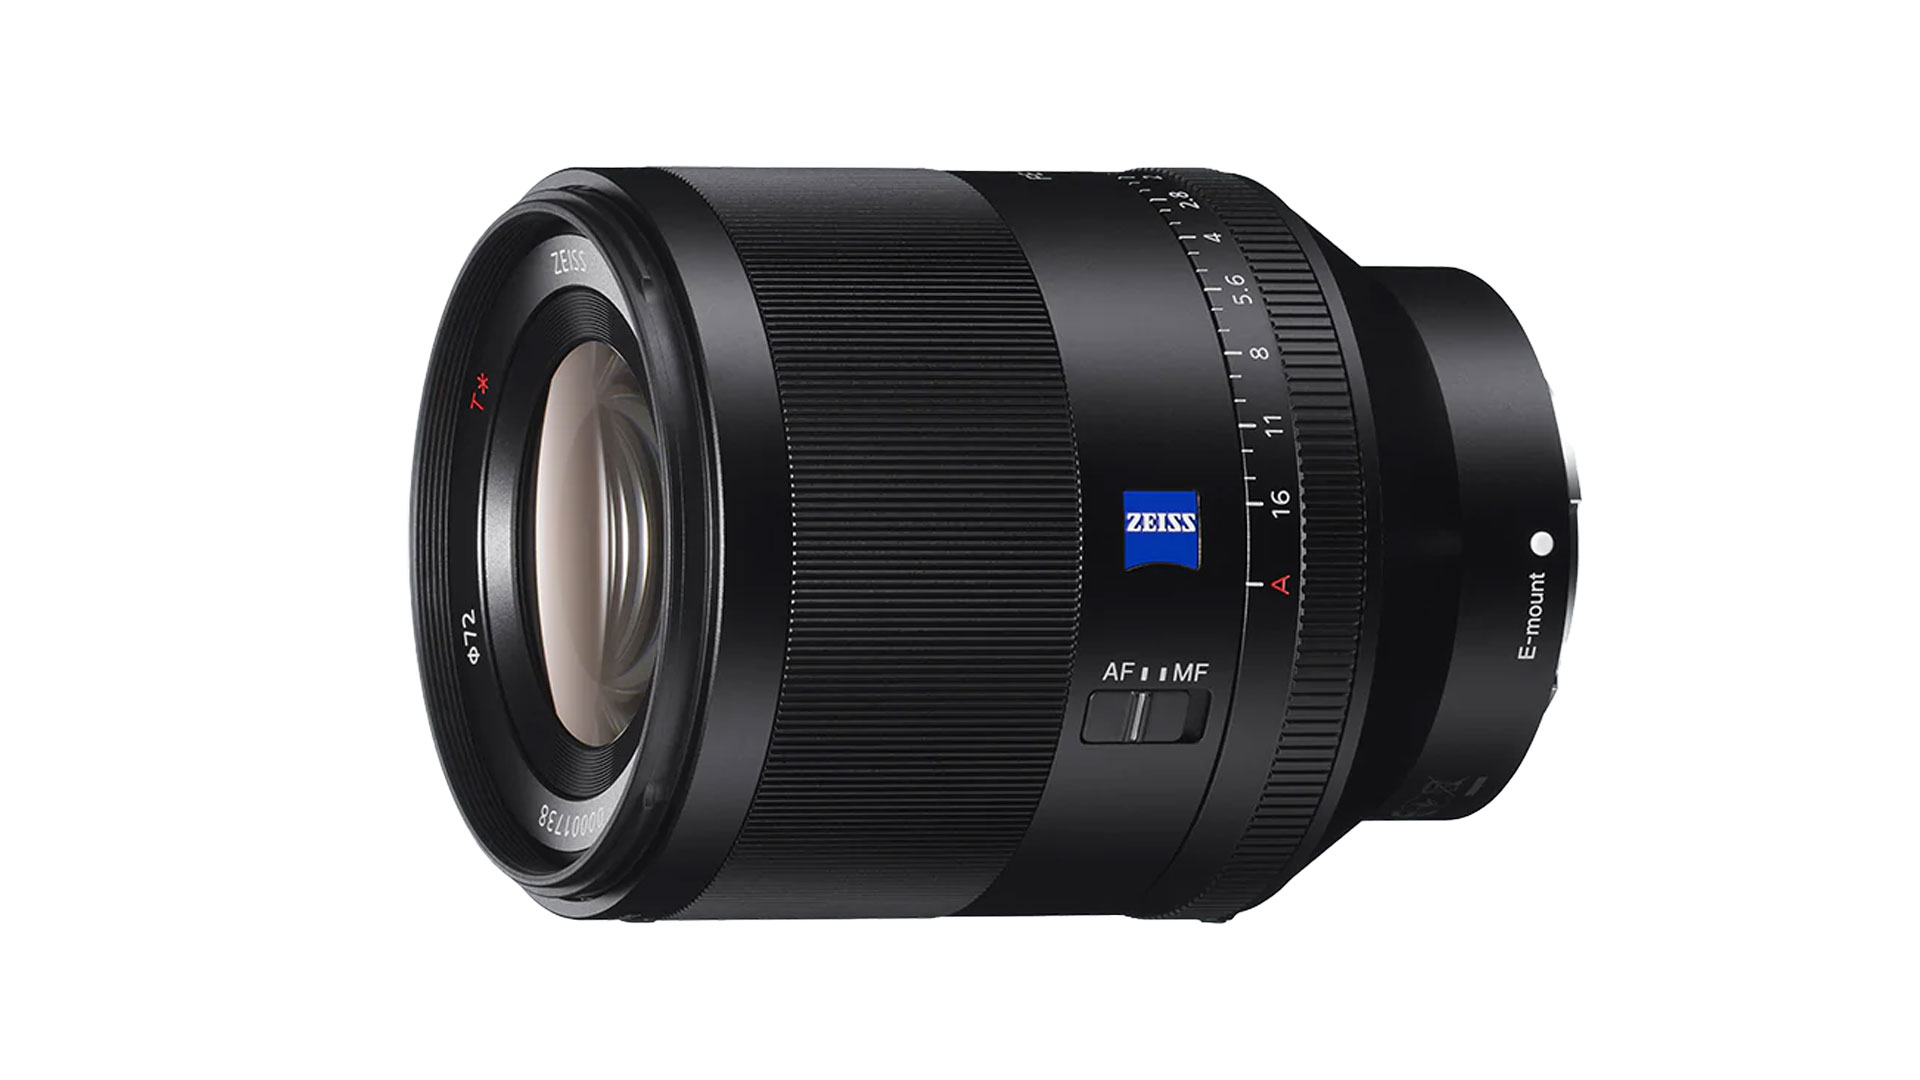 Best lenses for the Sony A7R III and A7R IV: Sony Planar T* FE 50mm f/1.4 ZA